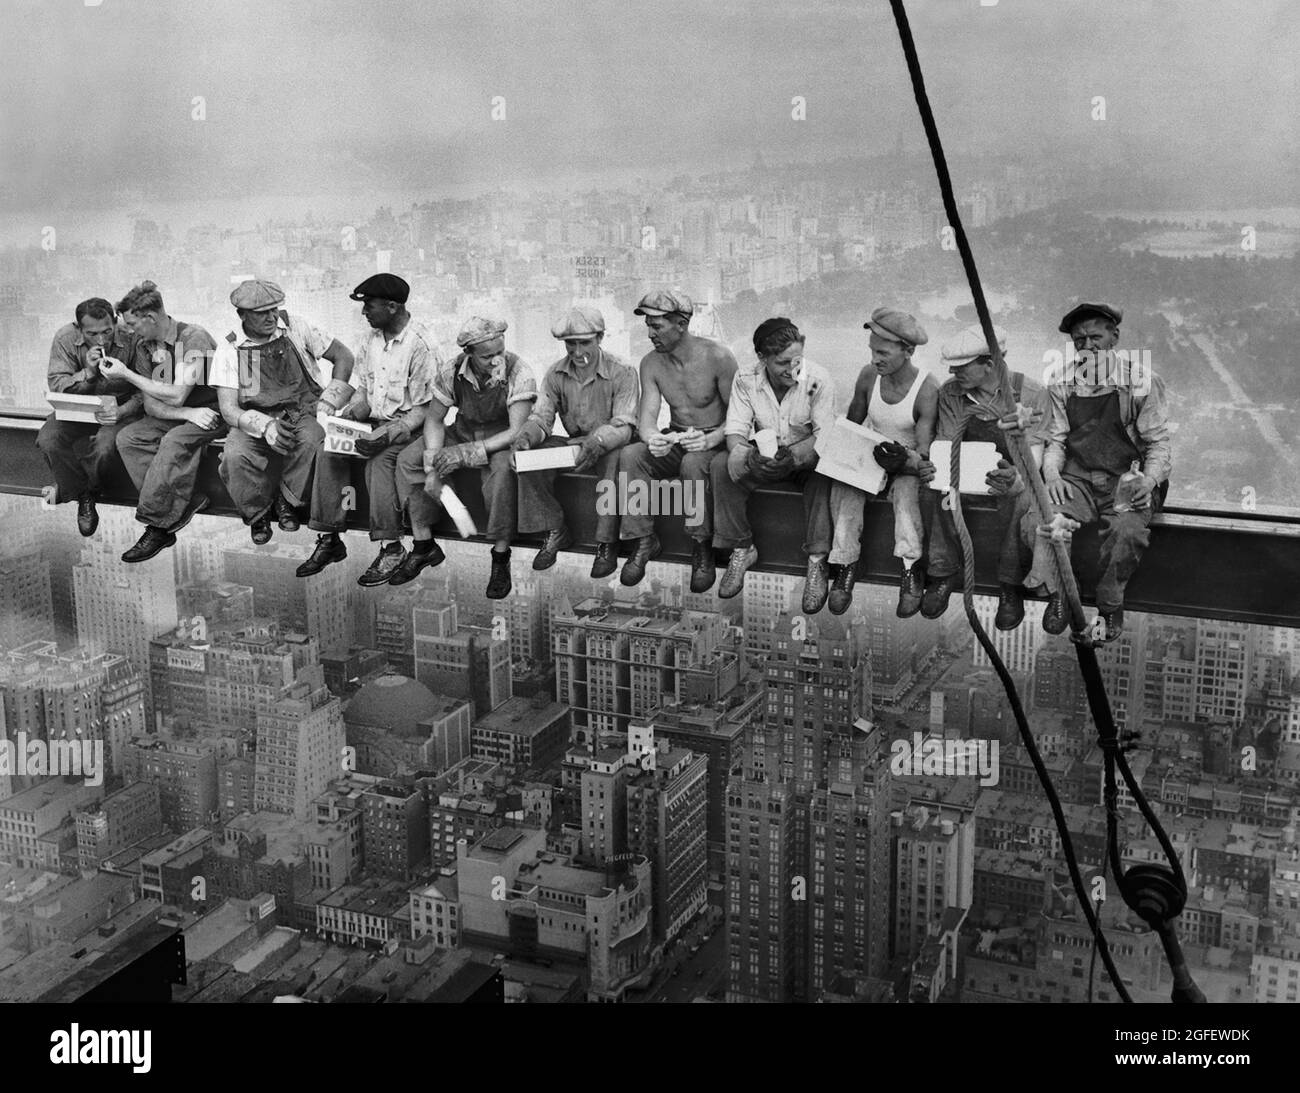 Lunch atop a Skyscraper, Rockefeller Plaza. Photograph by Charles Clyde Ebbets (probably). New York Construction Workers Lunching on a Crossbeam. Stock Photo